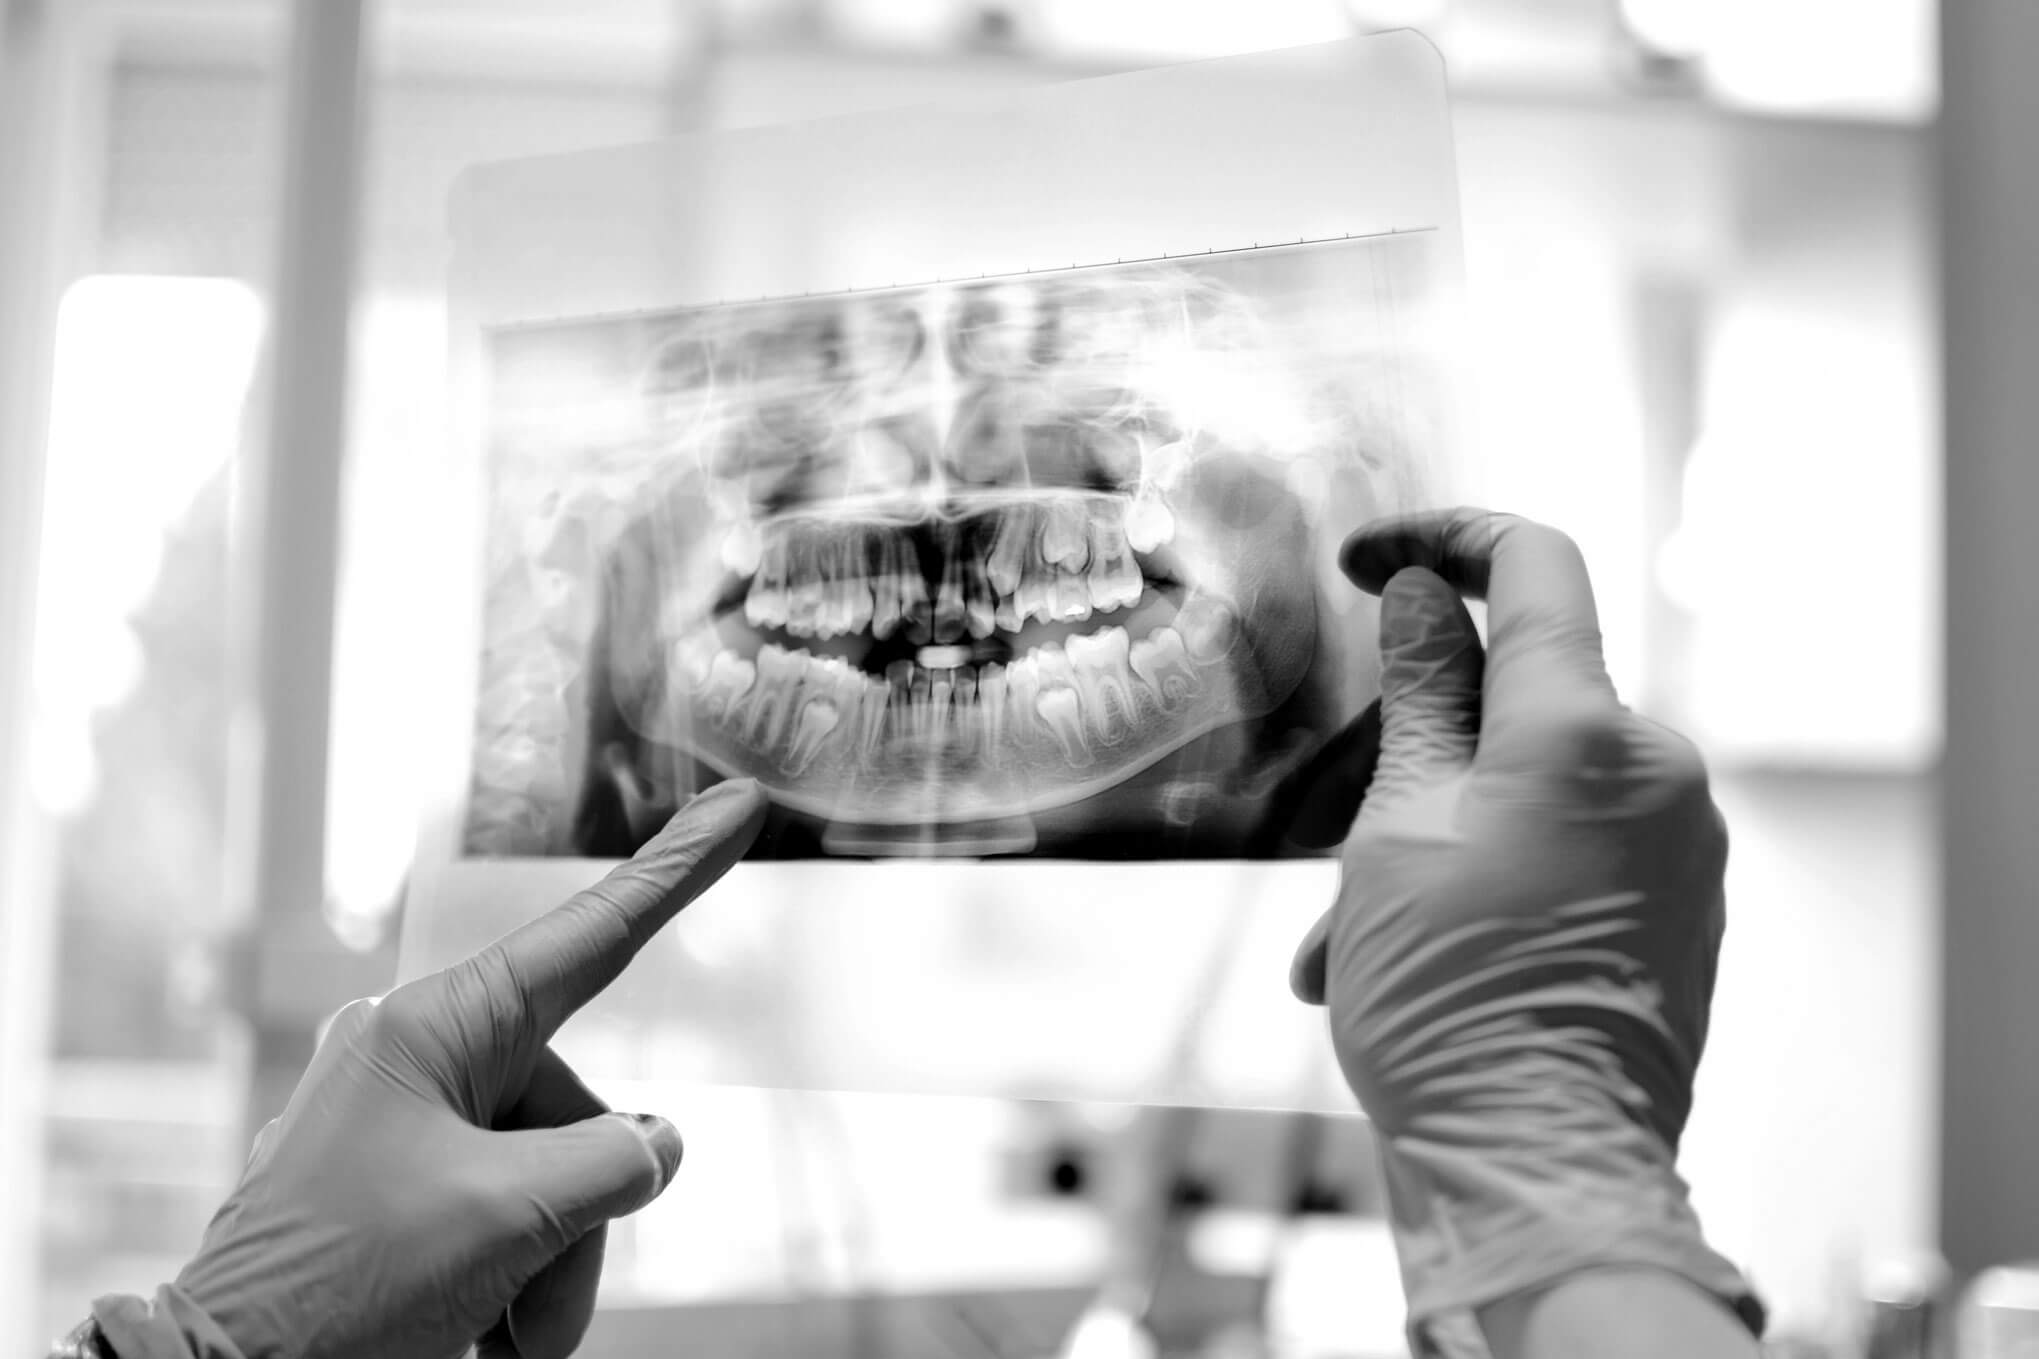 An X-ray image of a persons teeth.